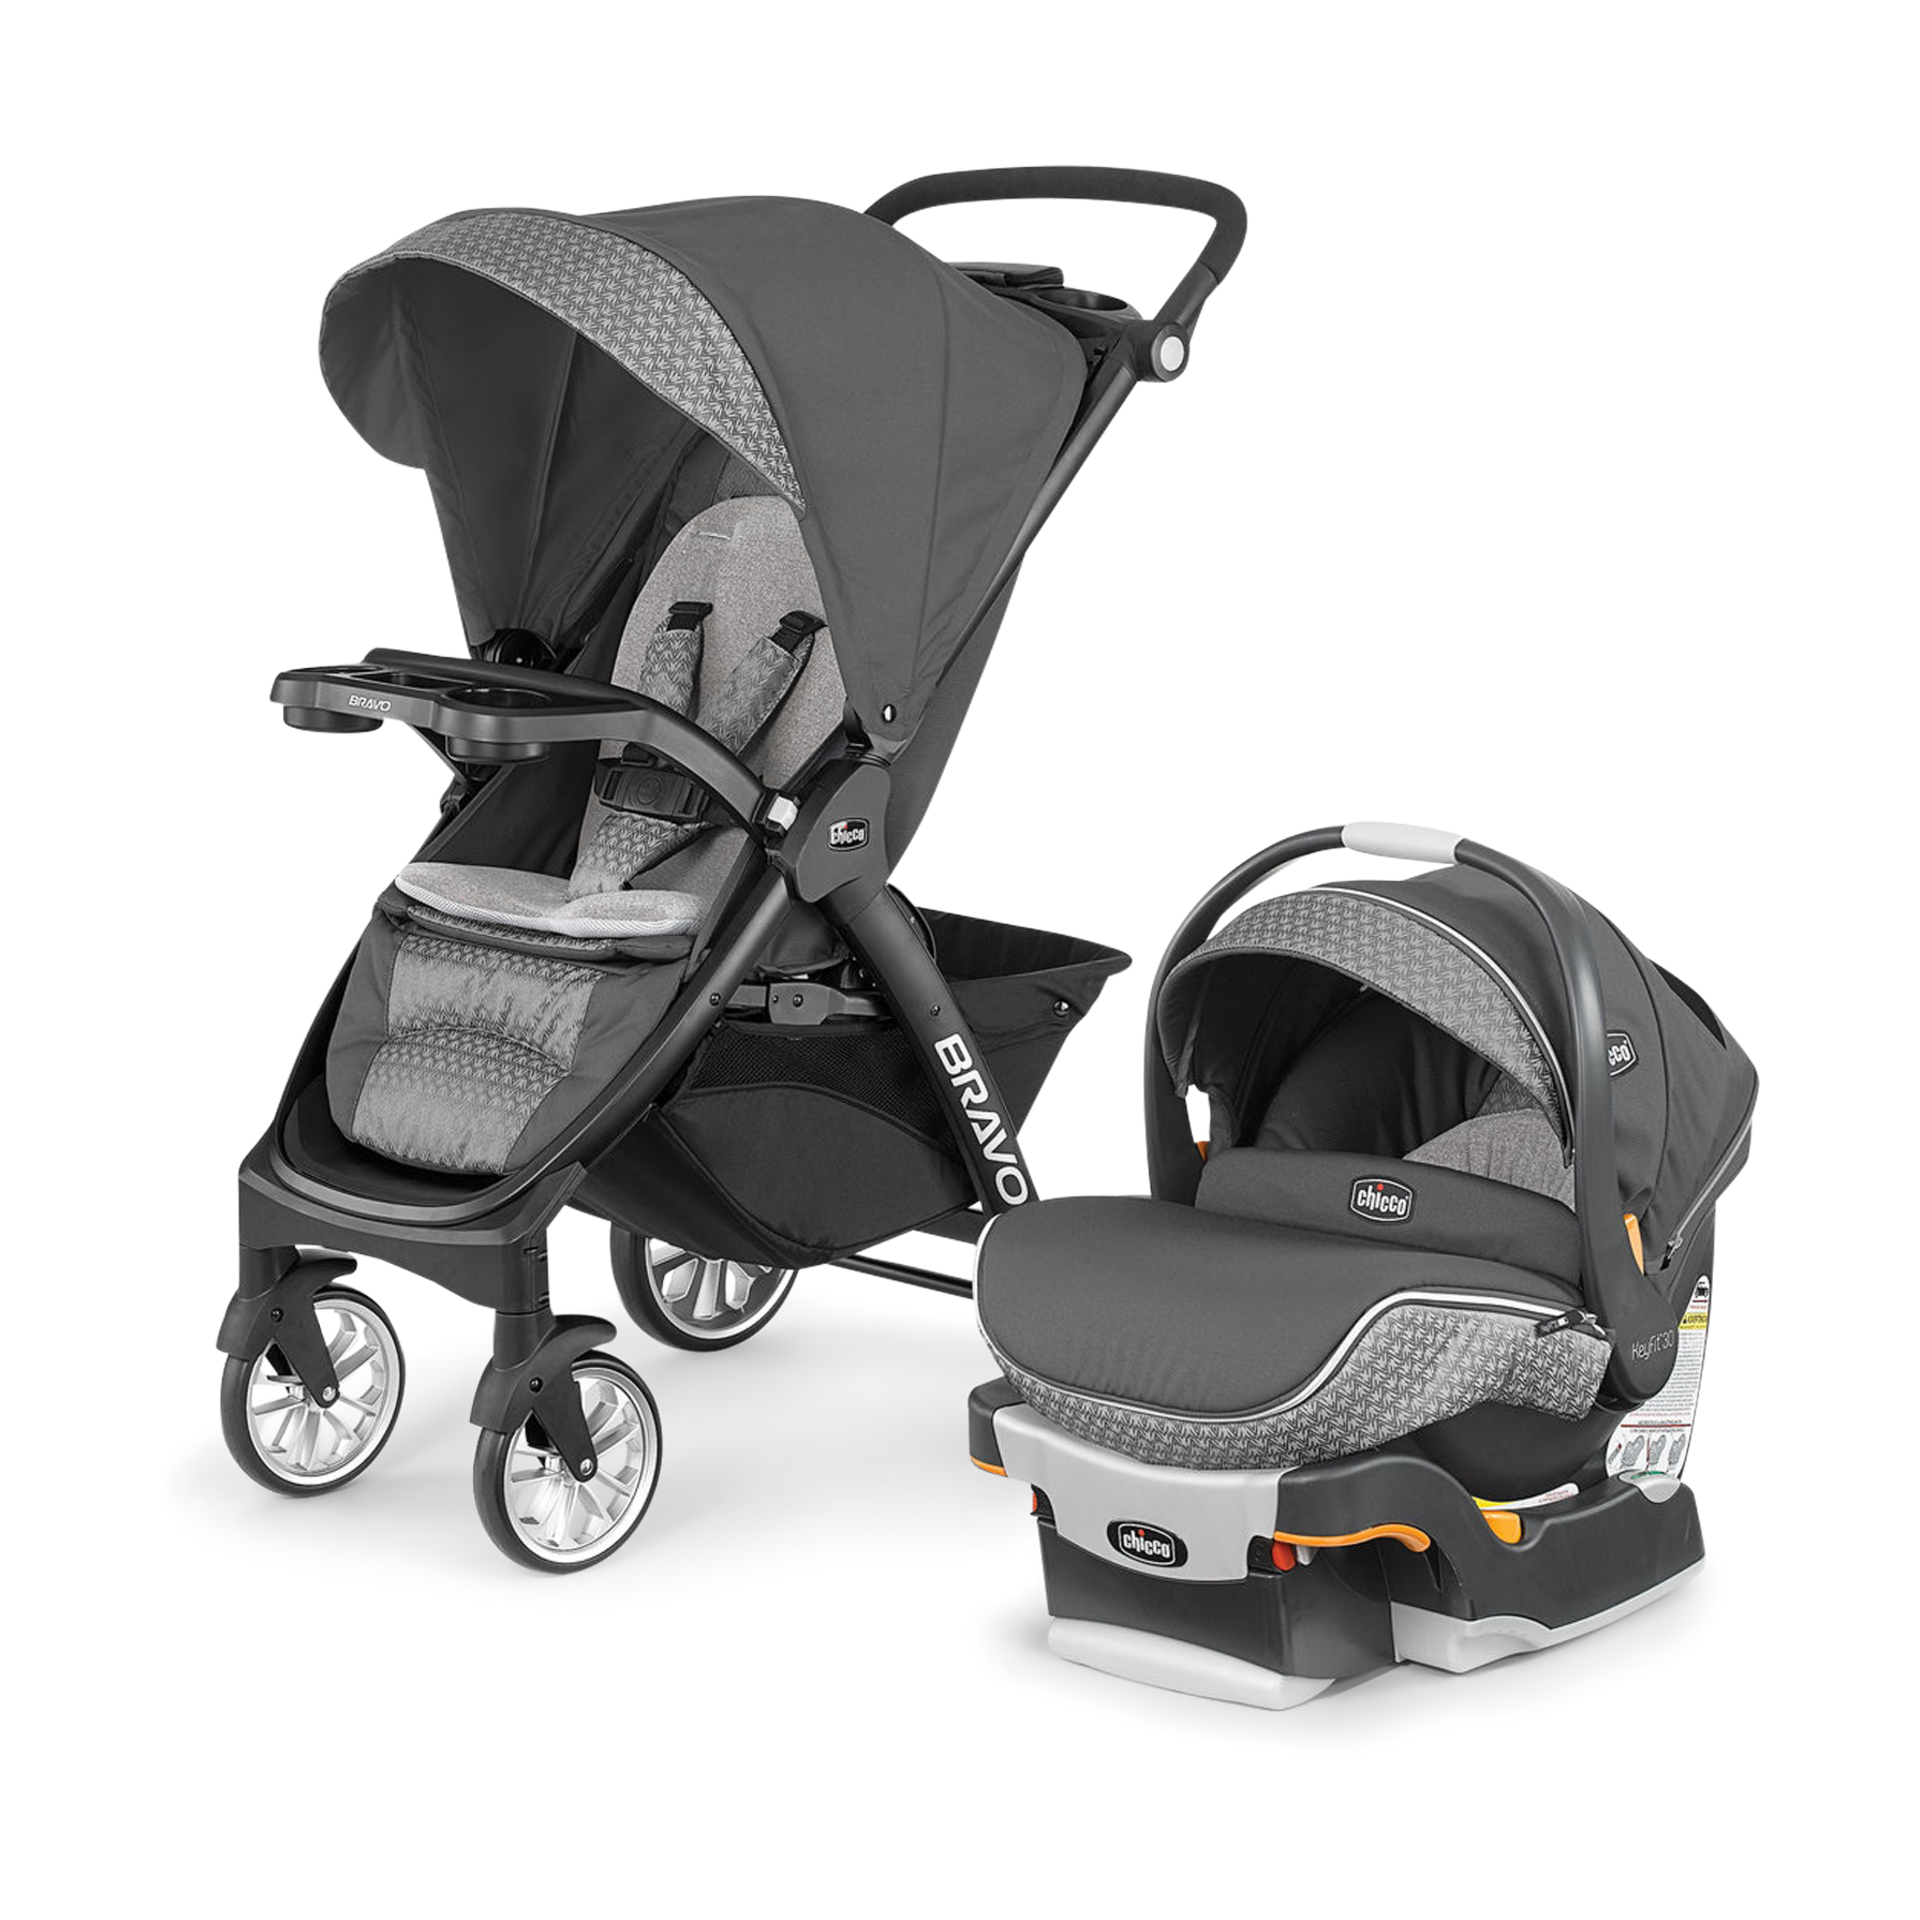 chicco infant car seat travel system